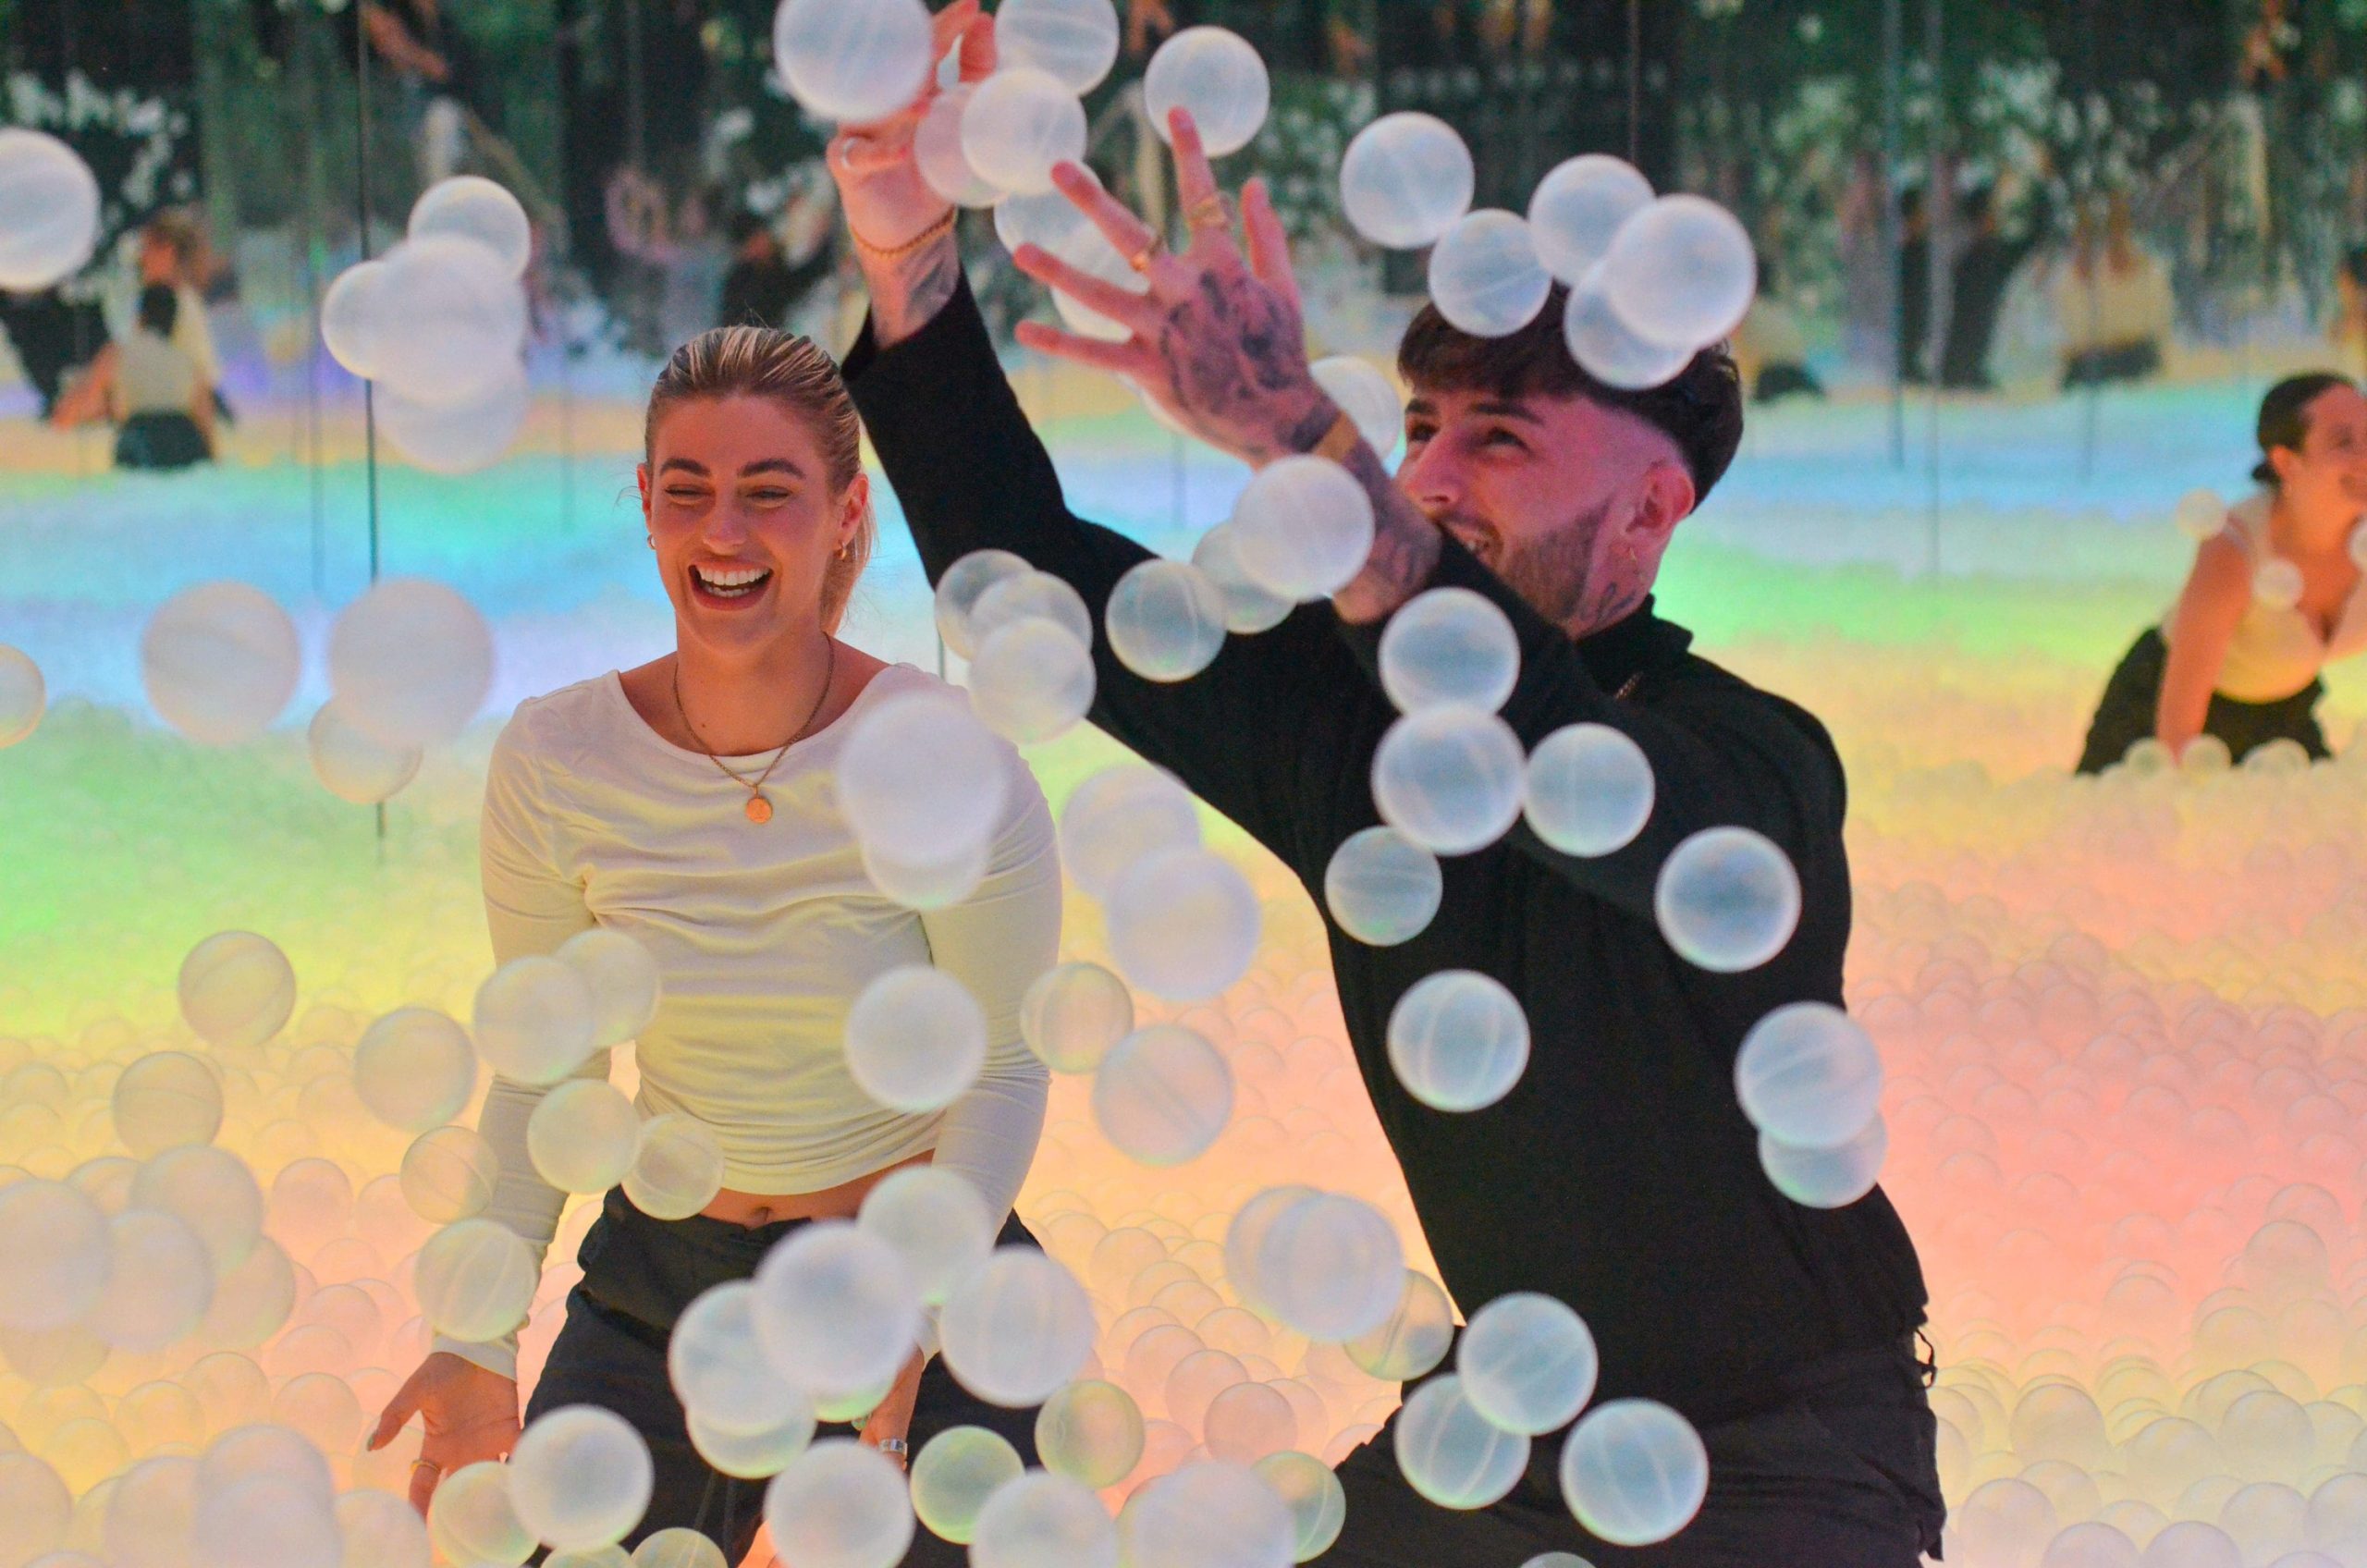 there’s-a-‘berlin-themed-ball-pit’-coming-to-london-this-summer